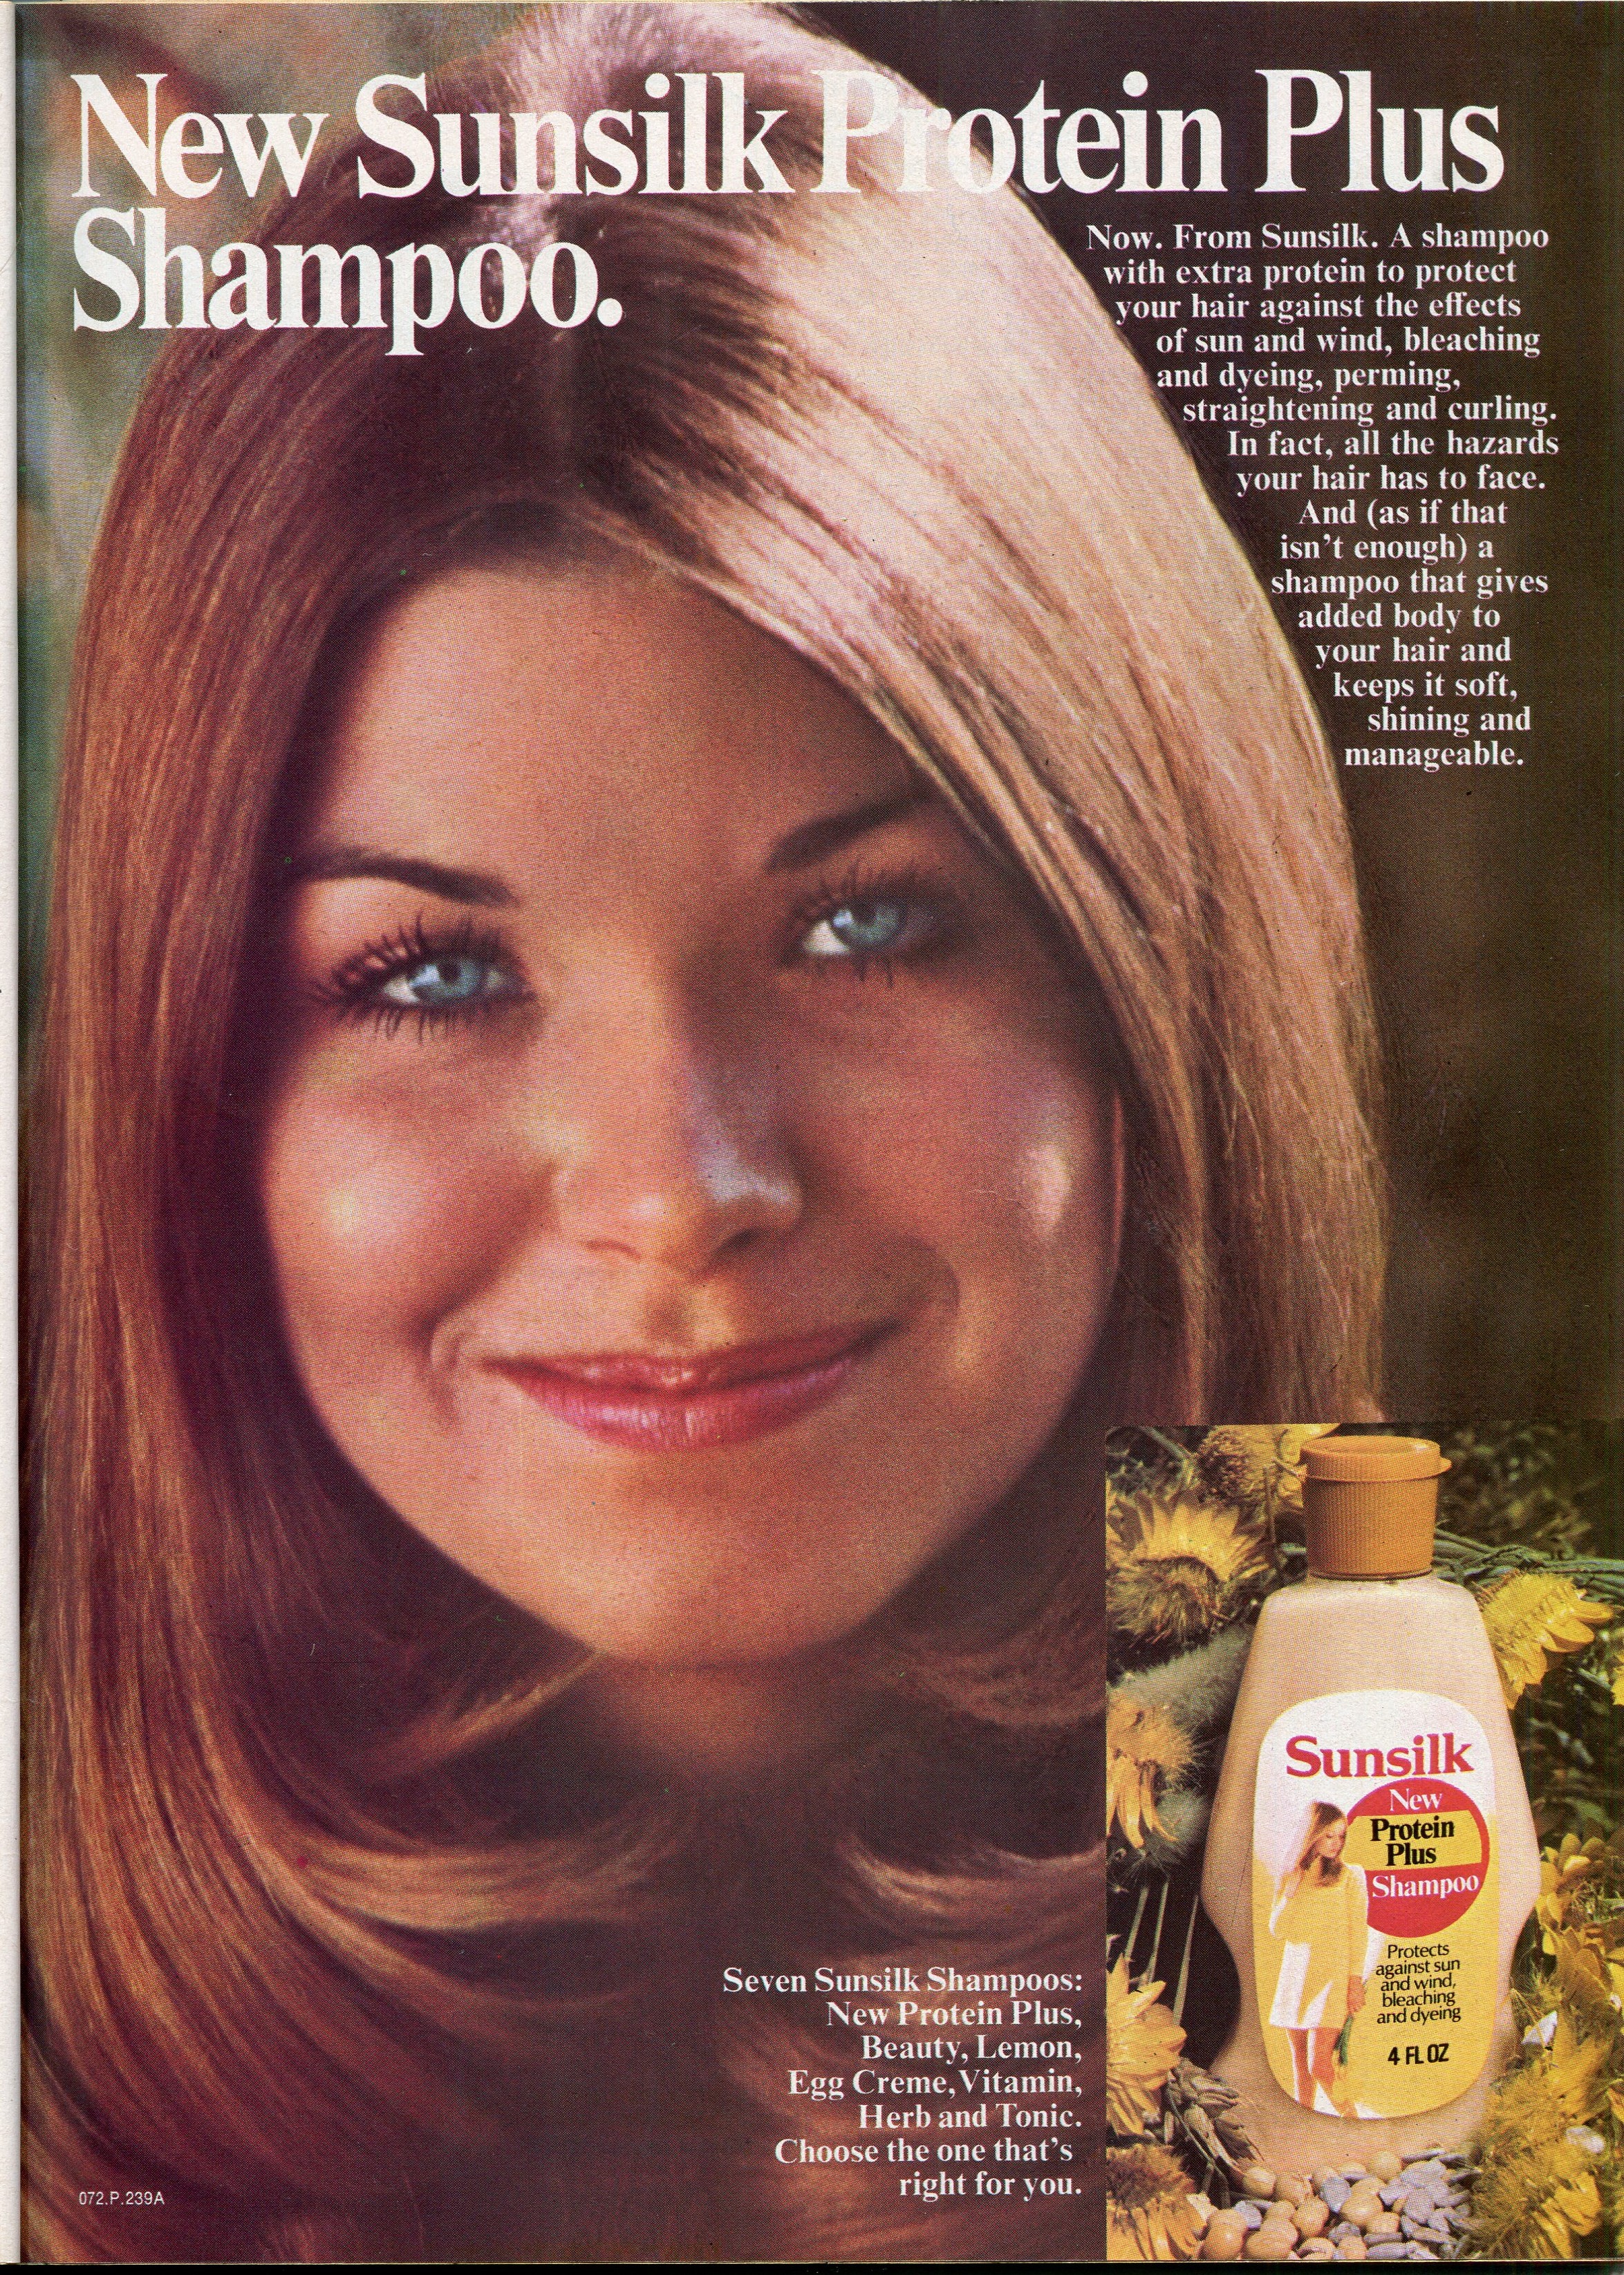 1973 advertisement for Sunsilk New Protein Plus Shampoo : Free Download,  Borrow, and Streaming : Internet Archive